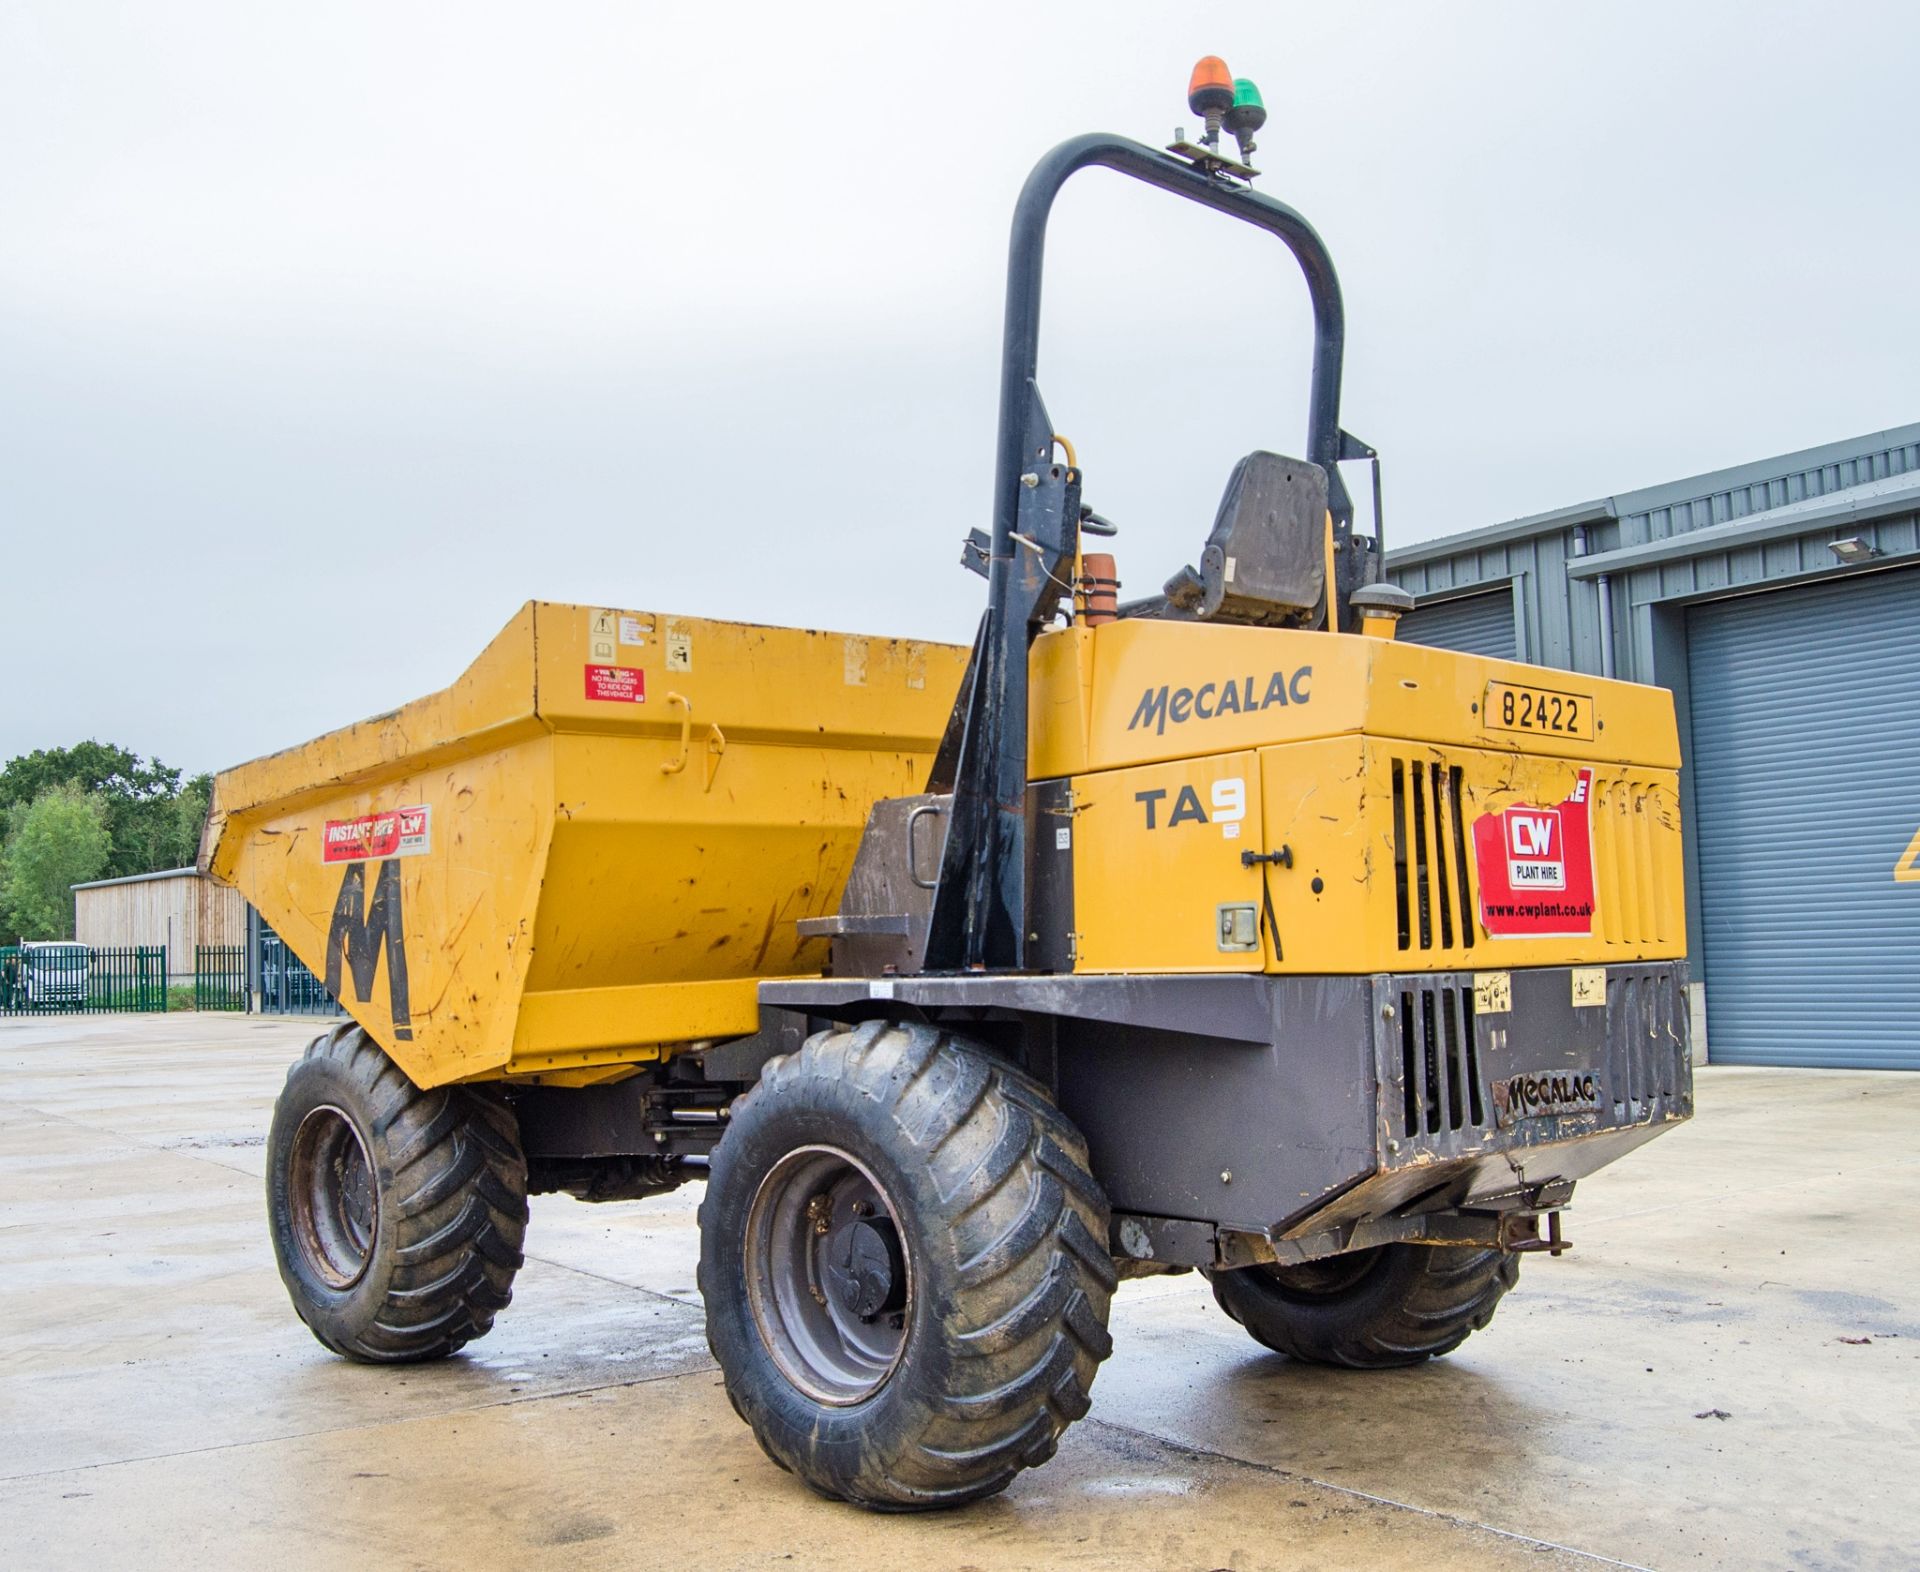 Mecalac TA9 9 tonne straight skip dumper Year: 2018 S/N: EJ2PS4319 Recorded Hours: 2157 82422 - Image 4 of 22